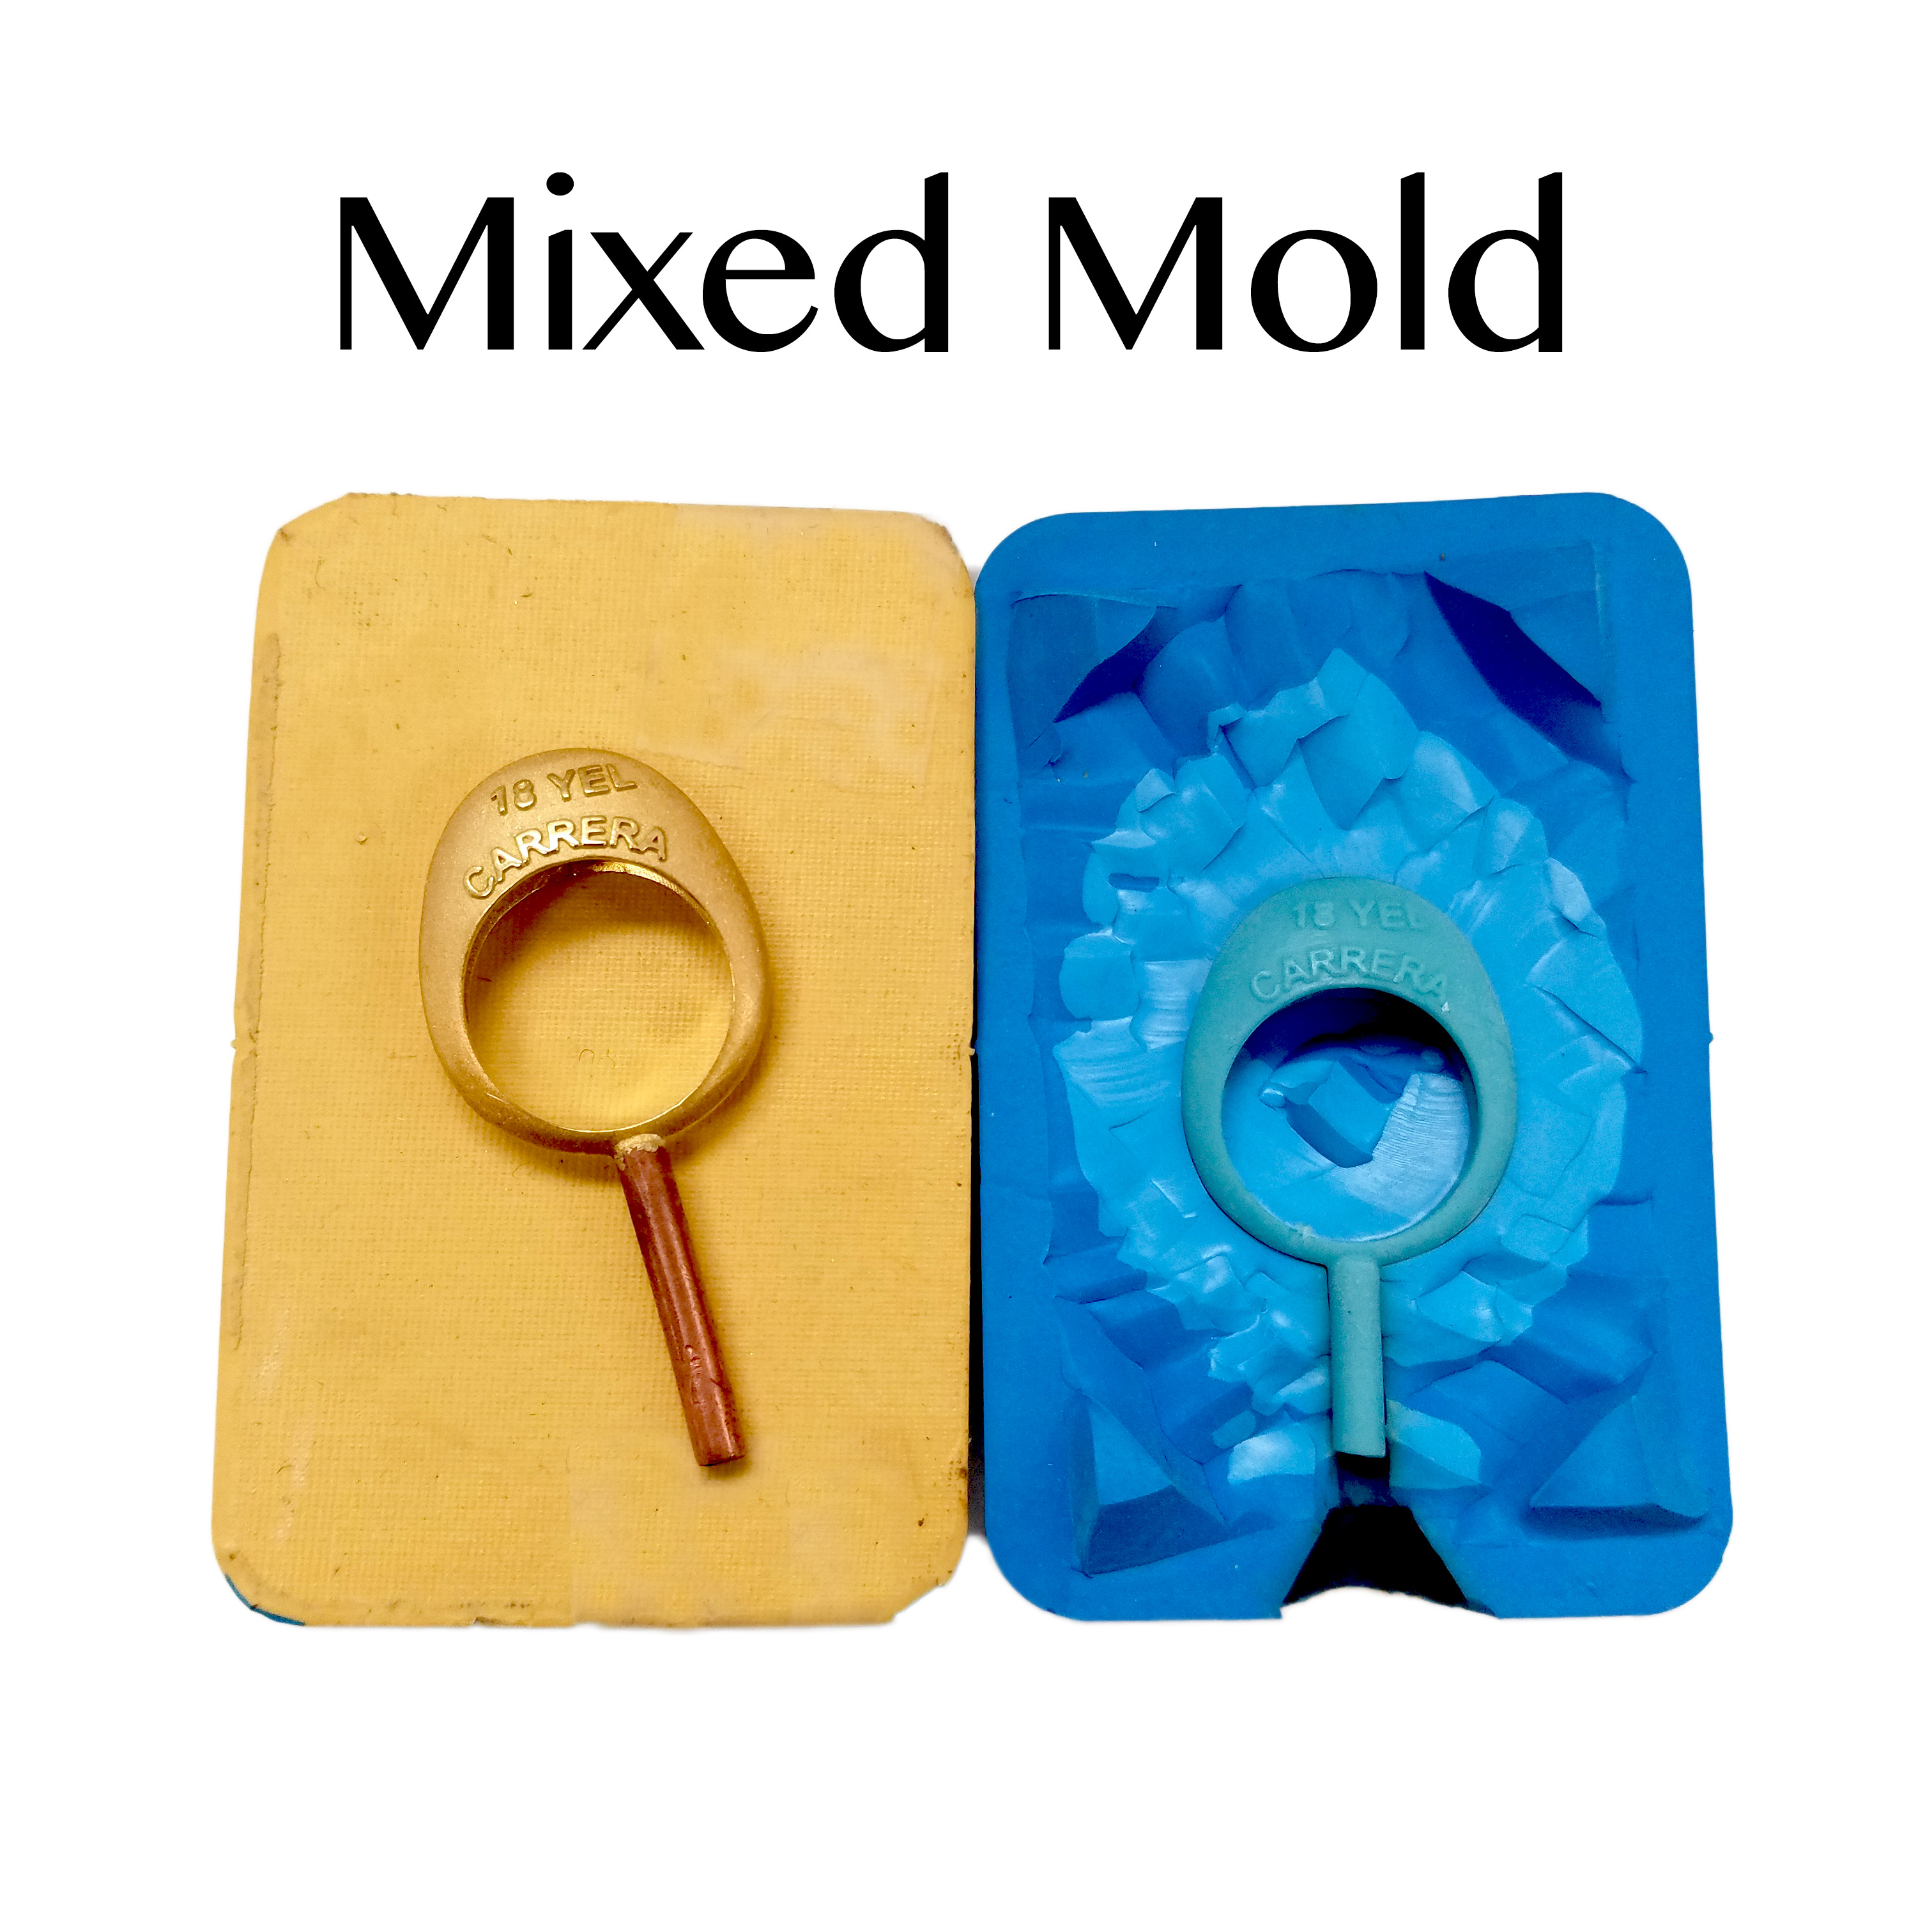 Jewelry Mold Making Services